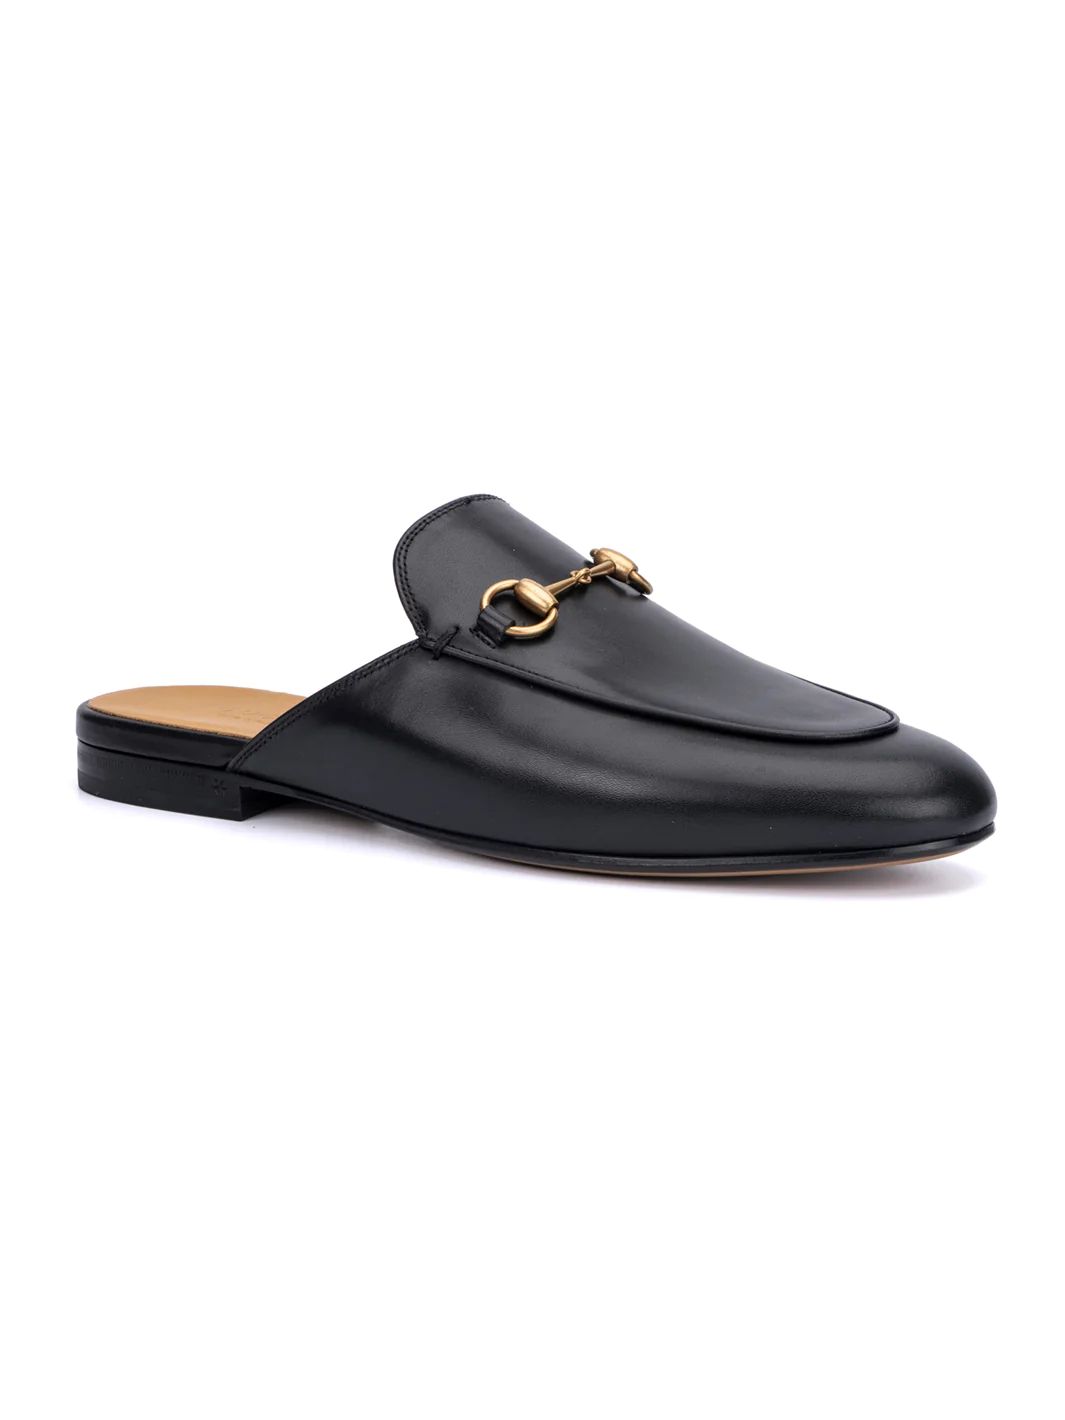 Gucci Women's Princetown Slipper in Black 36 Lord & Taylor | Lord & Taylor